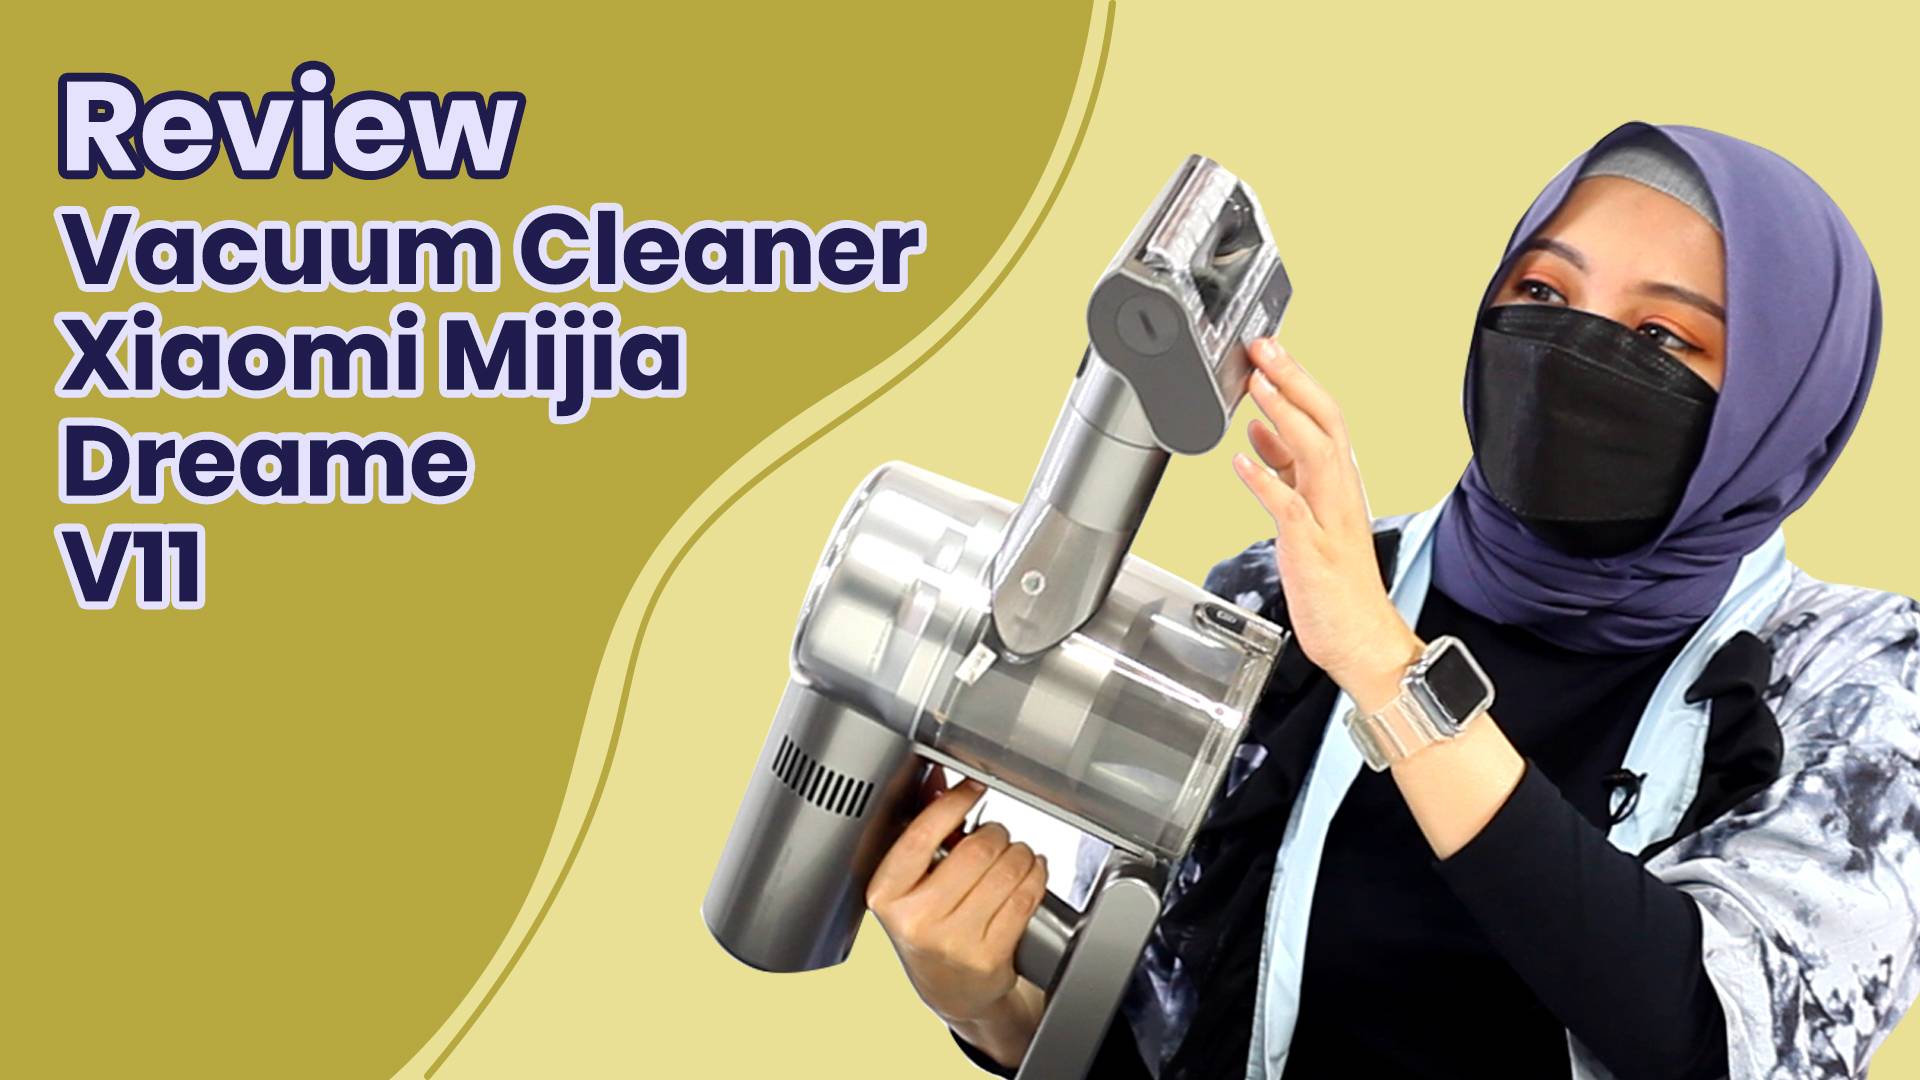 Review Vacuum Cleaner Xiaomi Mijia Dreame V11